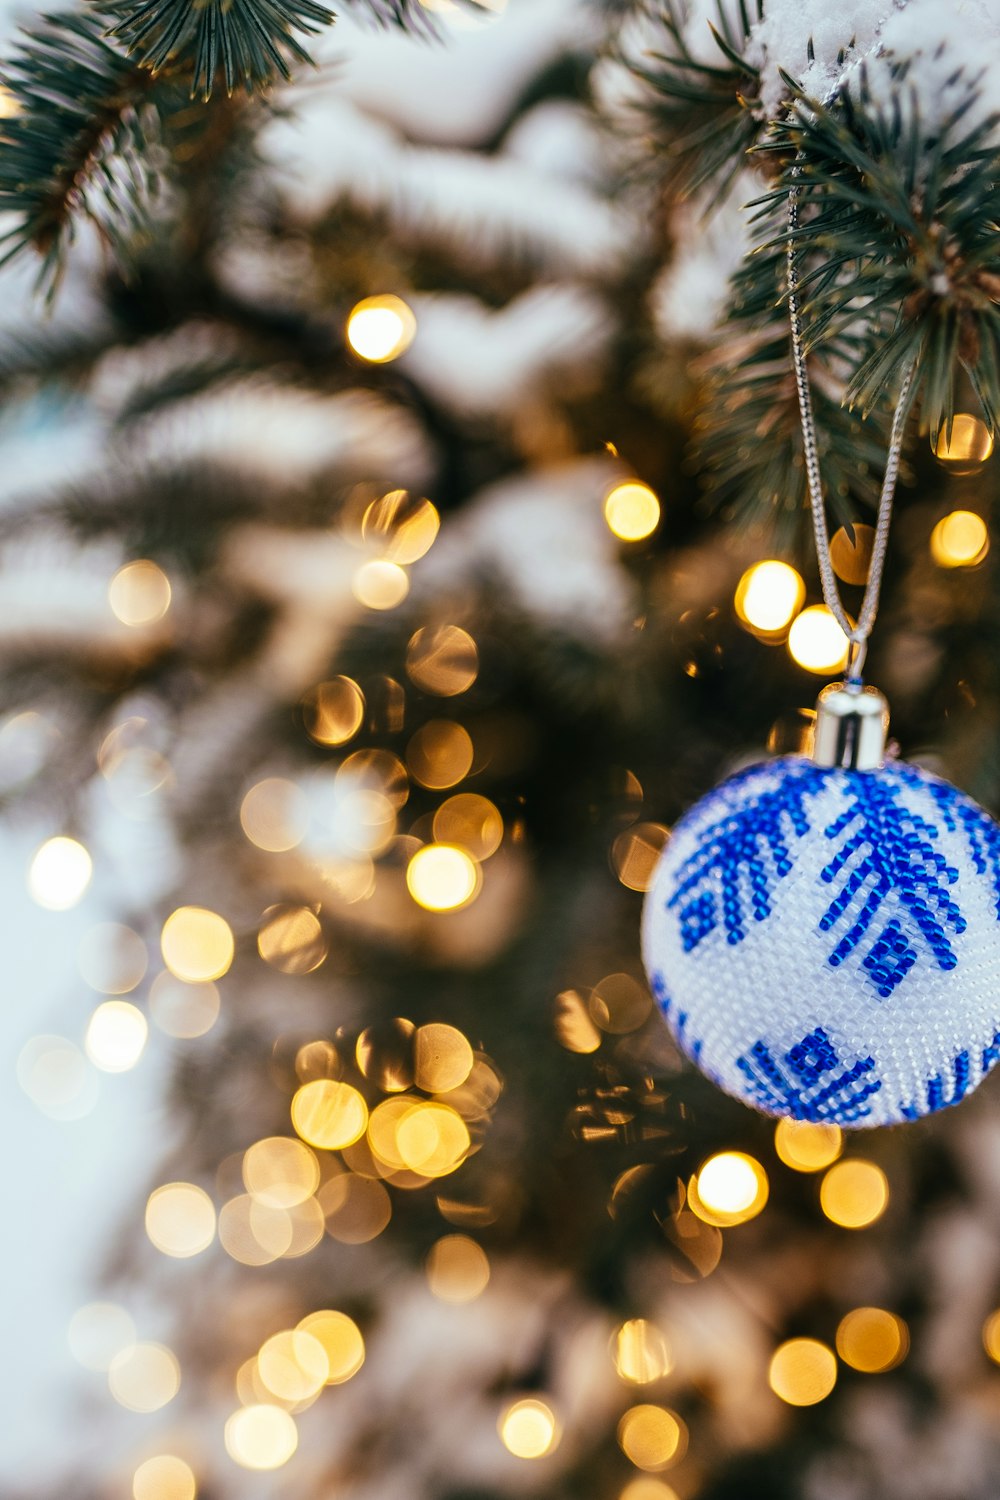 blue and white bauble hanging on christmas tree in bokeh photography